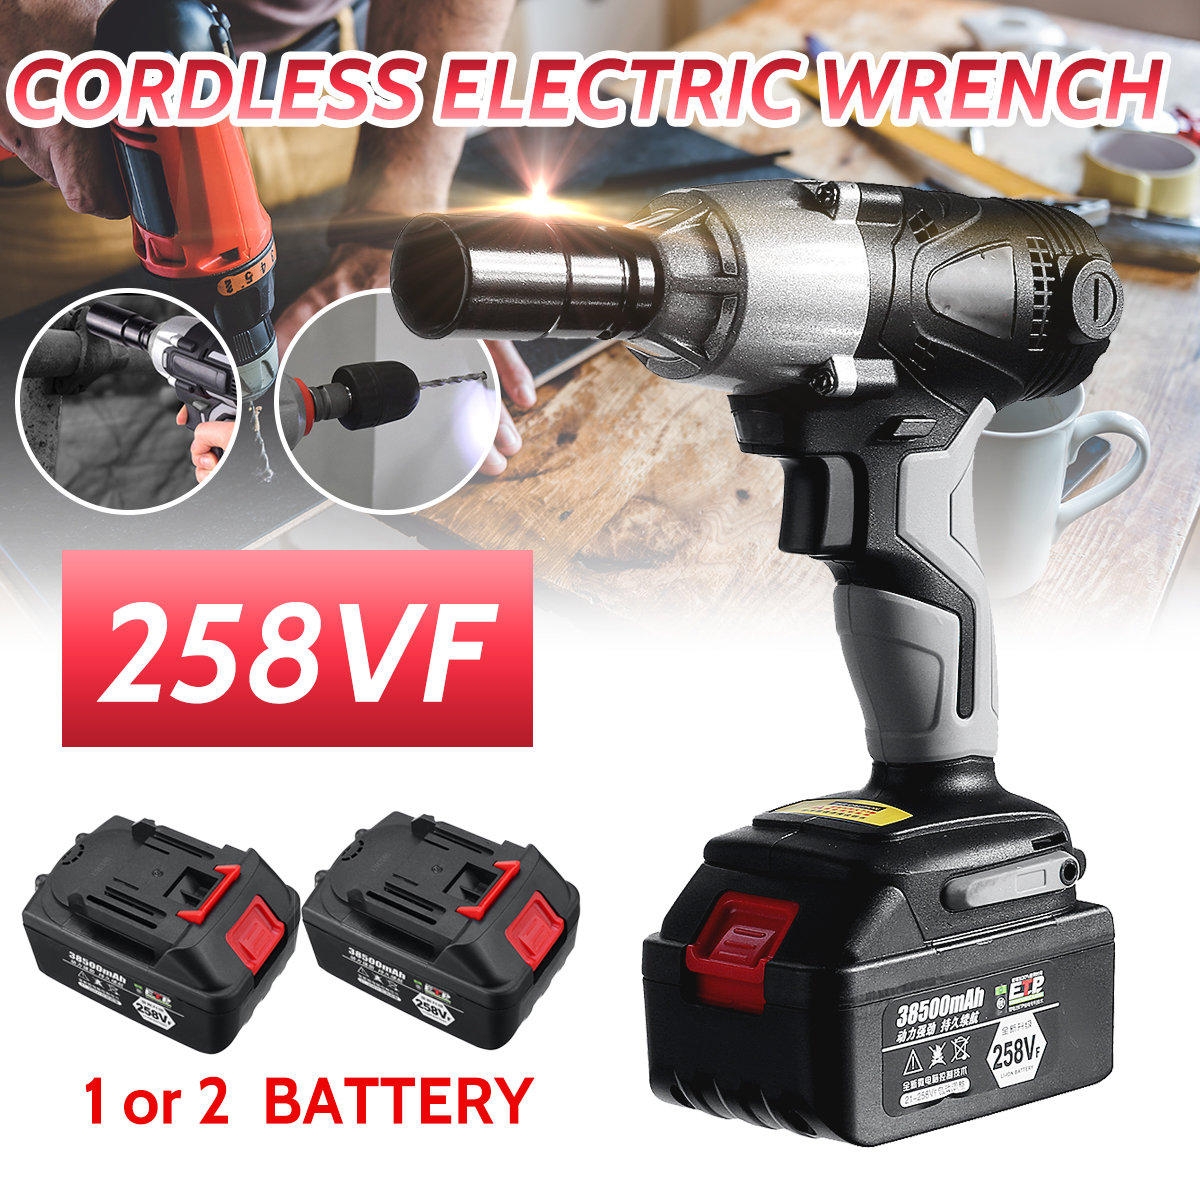 258VF-Cordless-Brushless-Electric-Impact-Wrench-Rechargeable-Wrench-Screwdriver-Power-Tool-W-12pcs-B-1839472-2